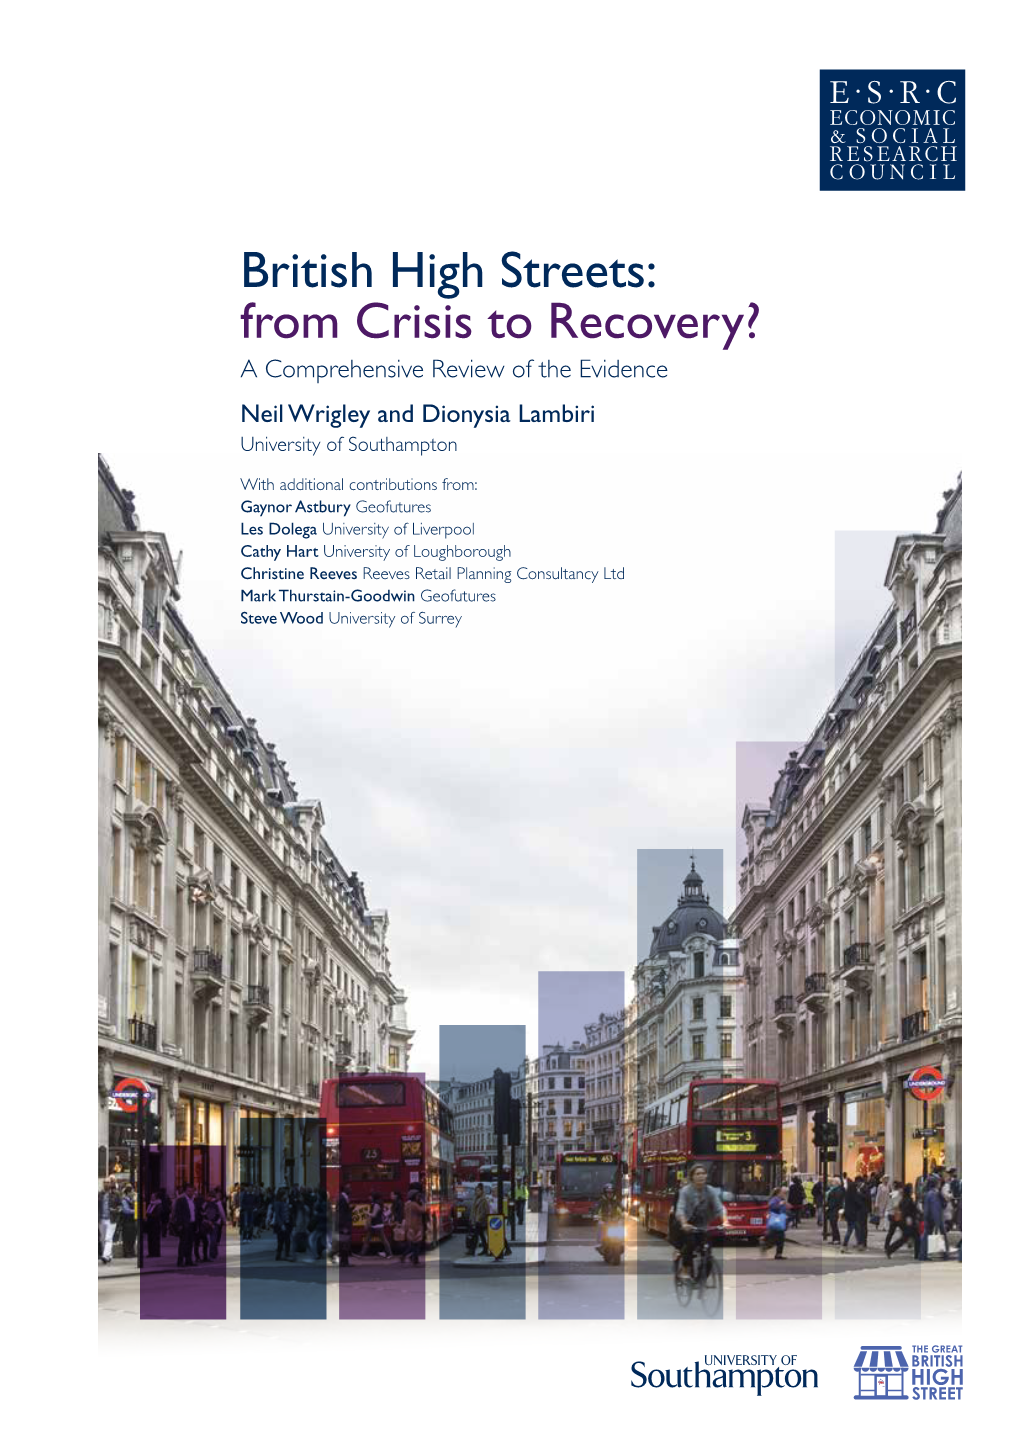 British High Streets: from Crisis to Recovery? a Comprehensive Review of the Evidence Neil Wrigley and Dionysia Lambiri University of Southampton